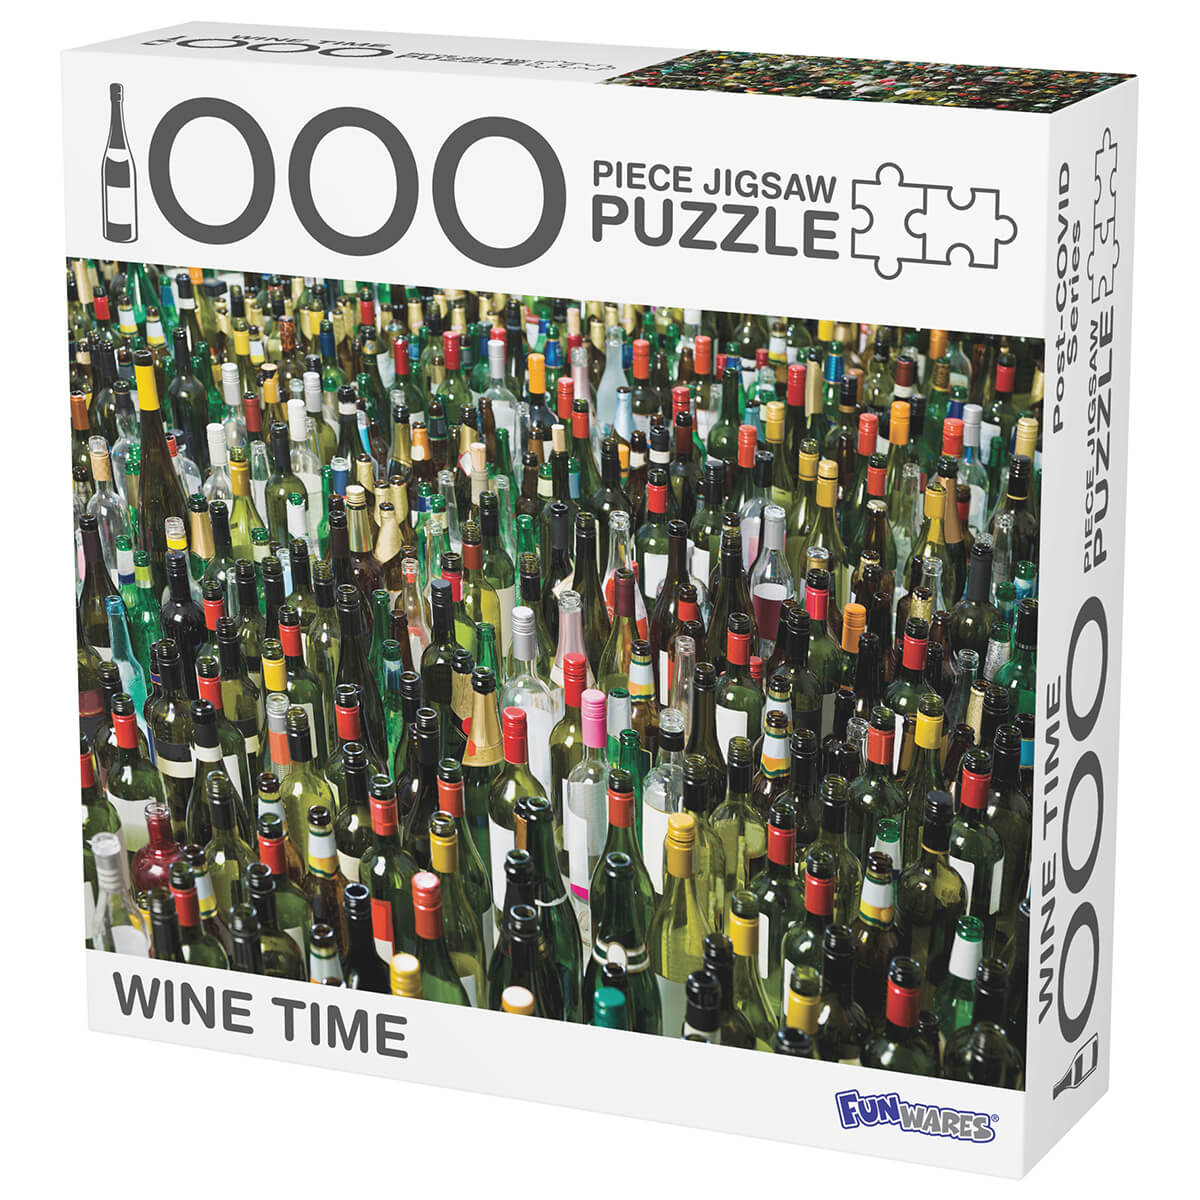 Funwares Wine Time 1000 Piece Jigsaw Puzzle